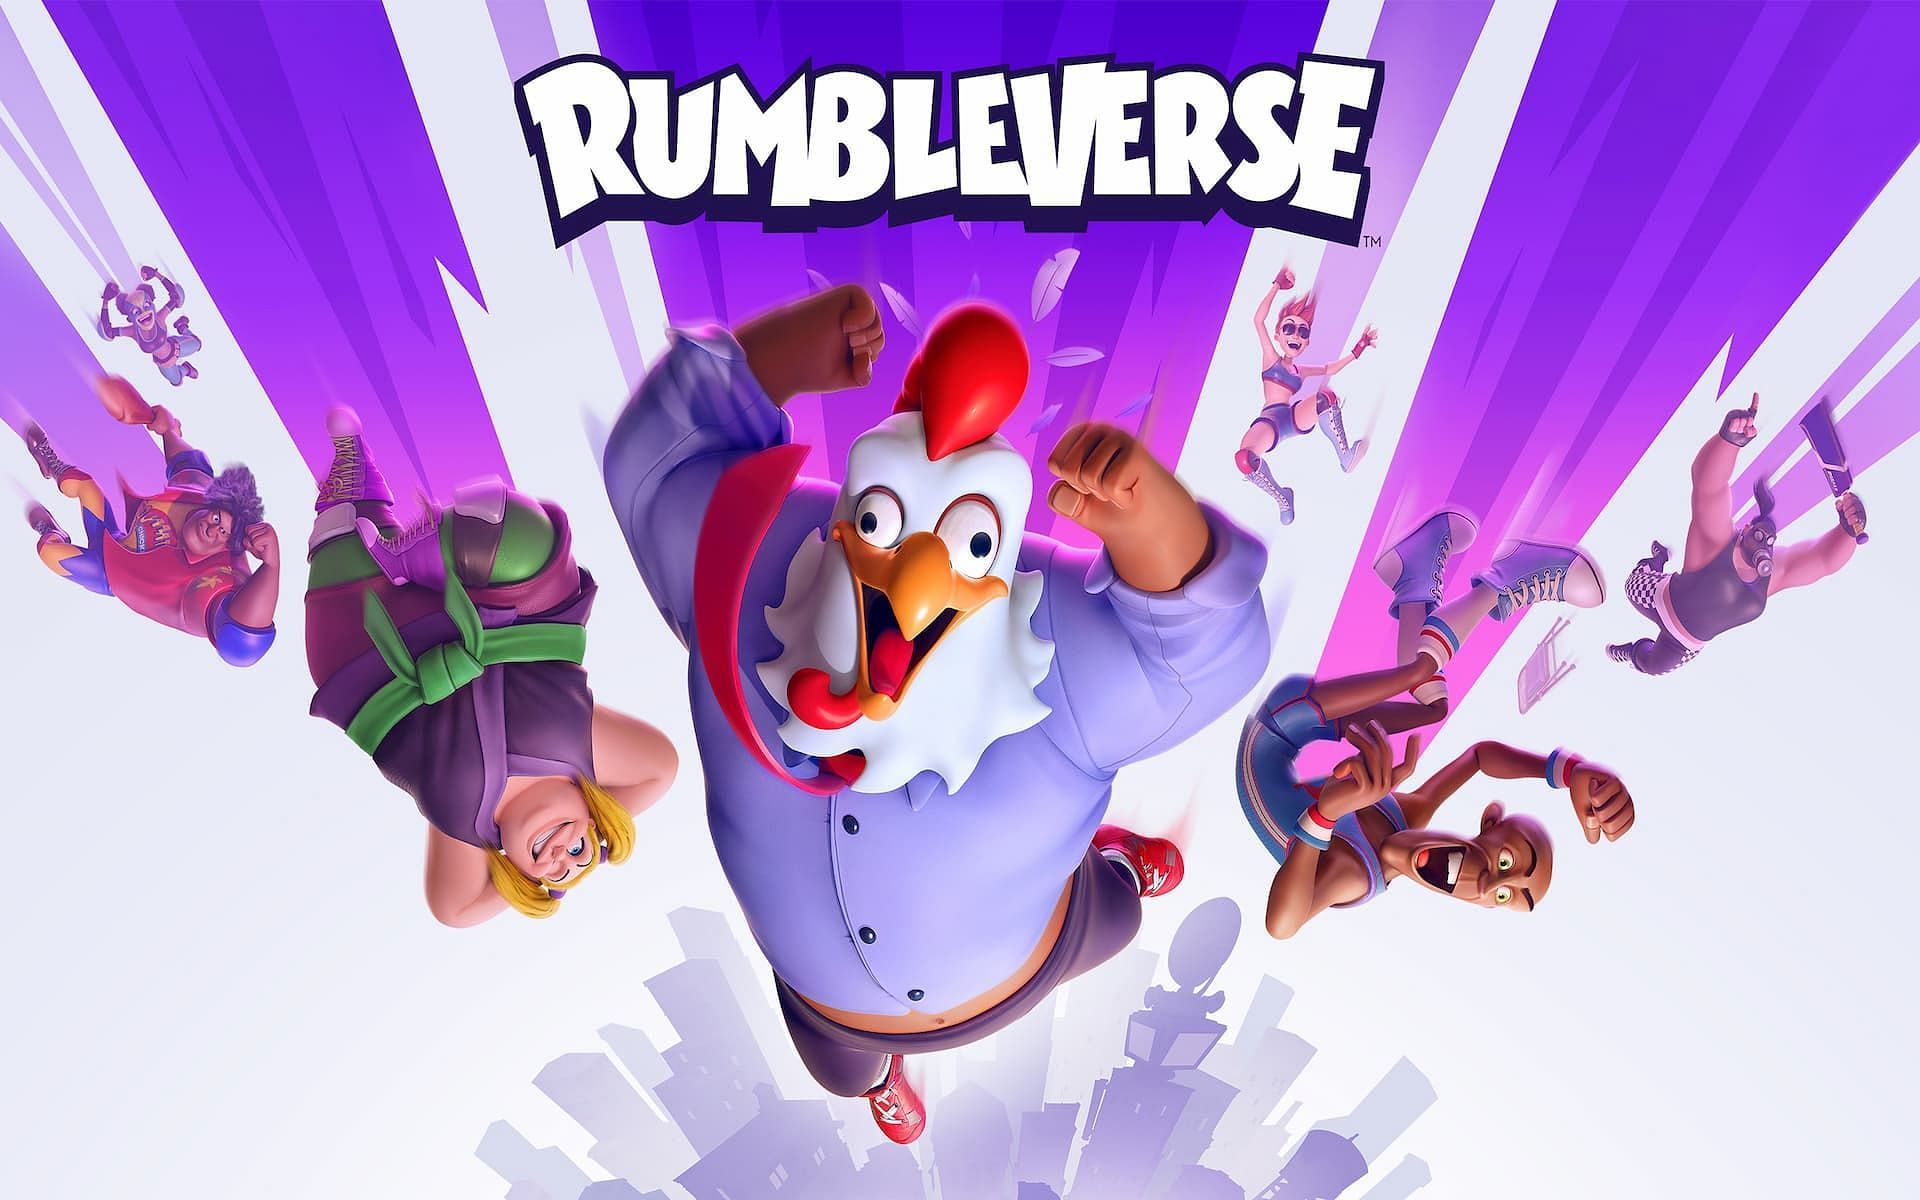 A promotional image for Rumbleverse (Image via Iron Galaxy)